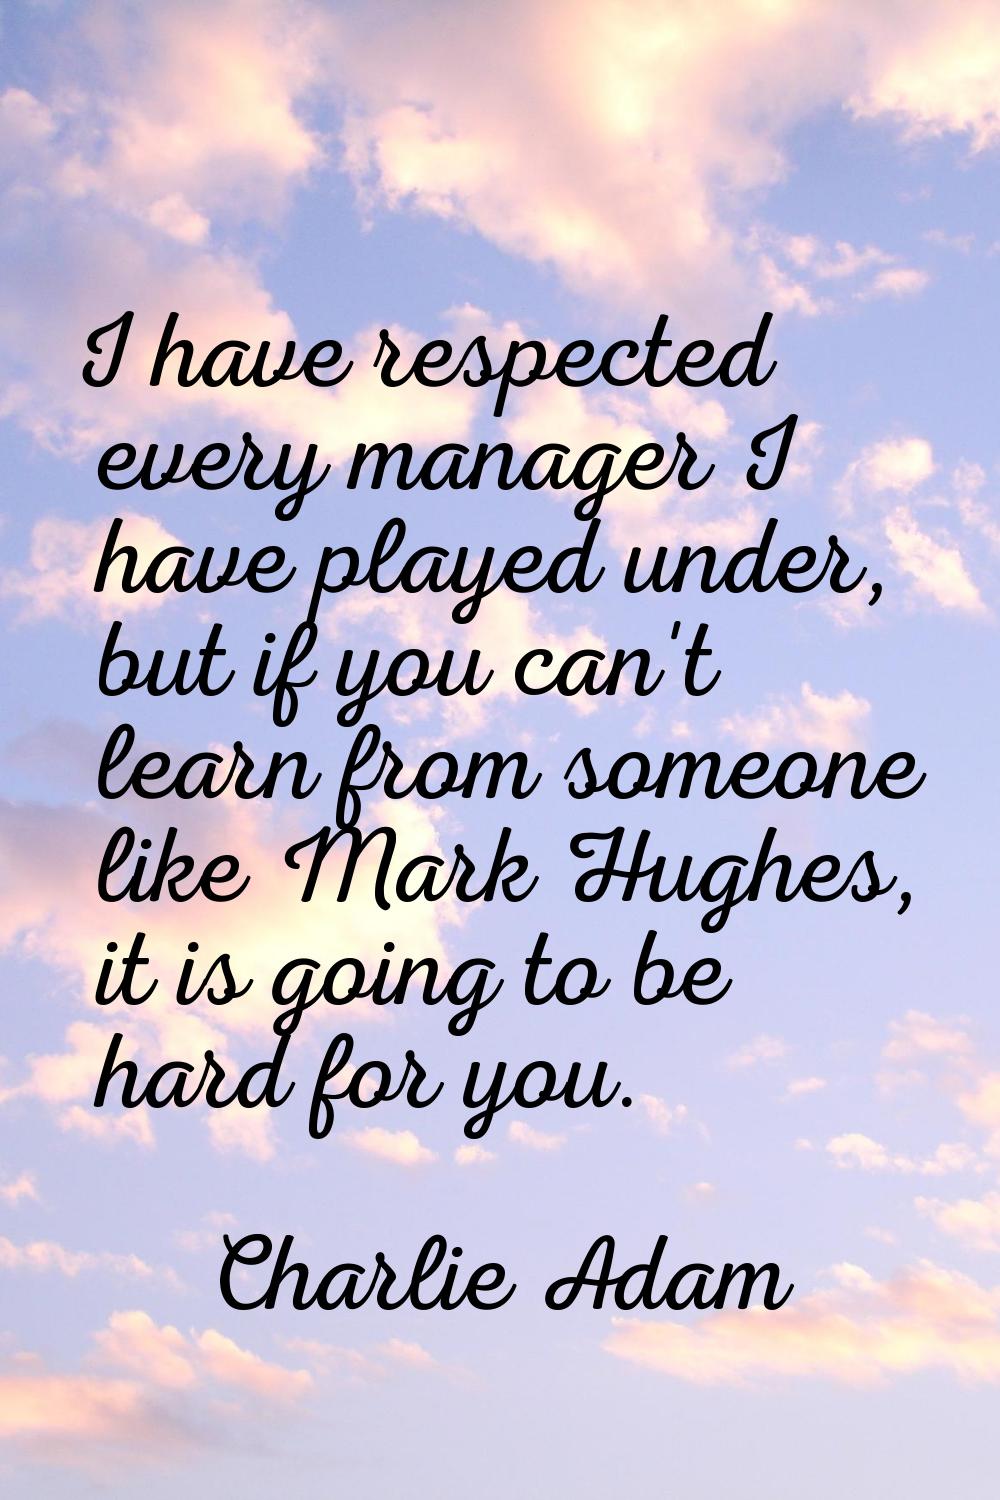 I have respected every manager I have played under, but if you can't learn from someone like Mark H